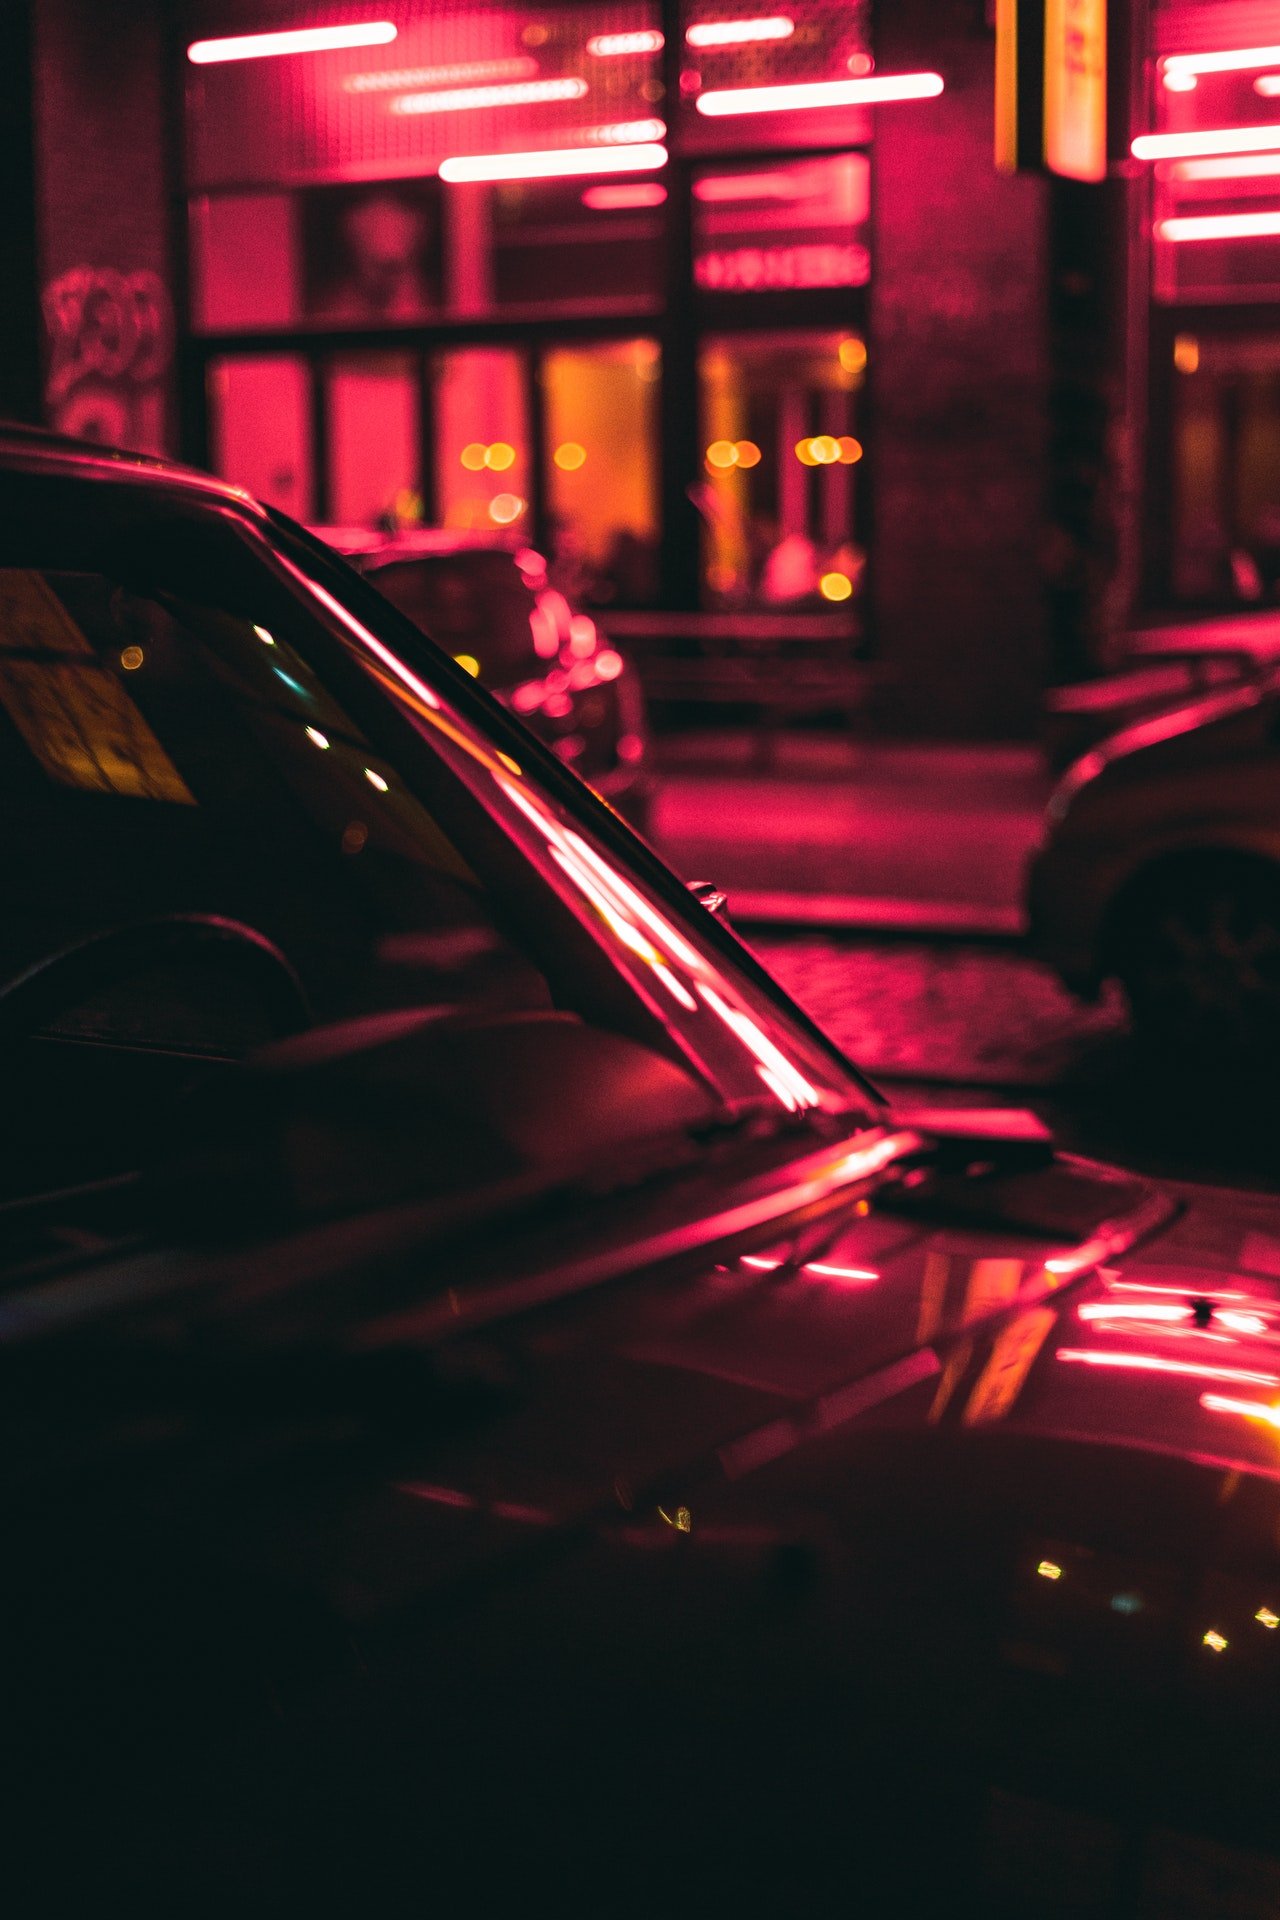 He sped to find her. | Source: Pexels